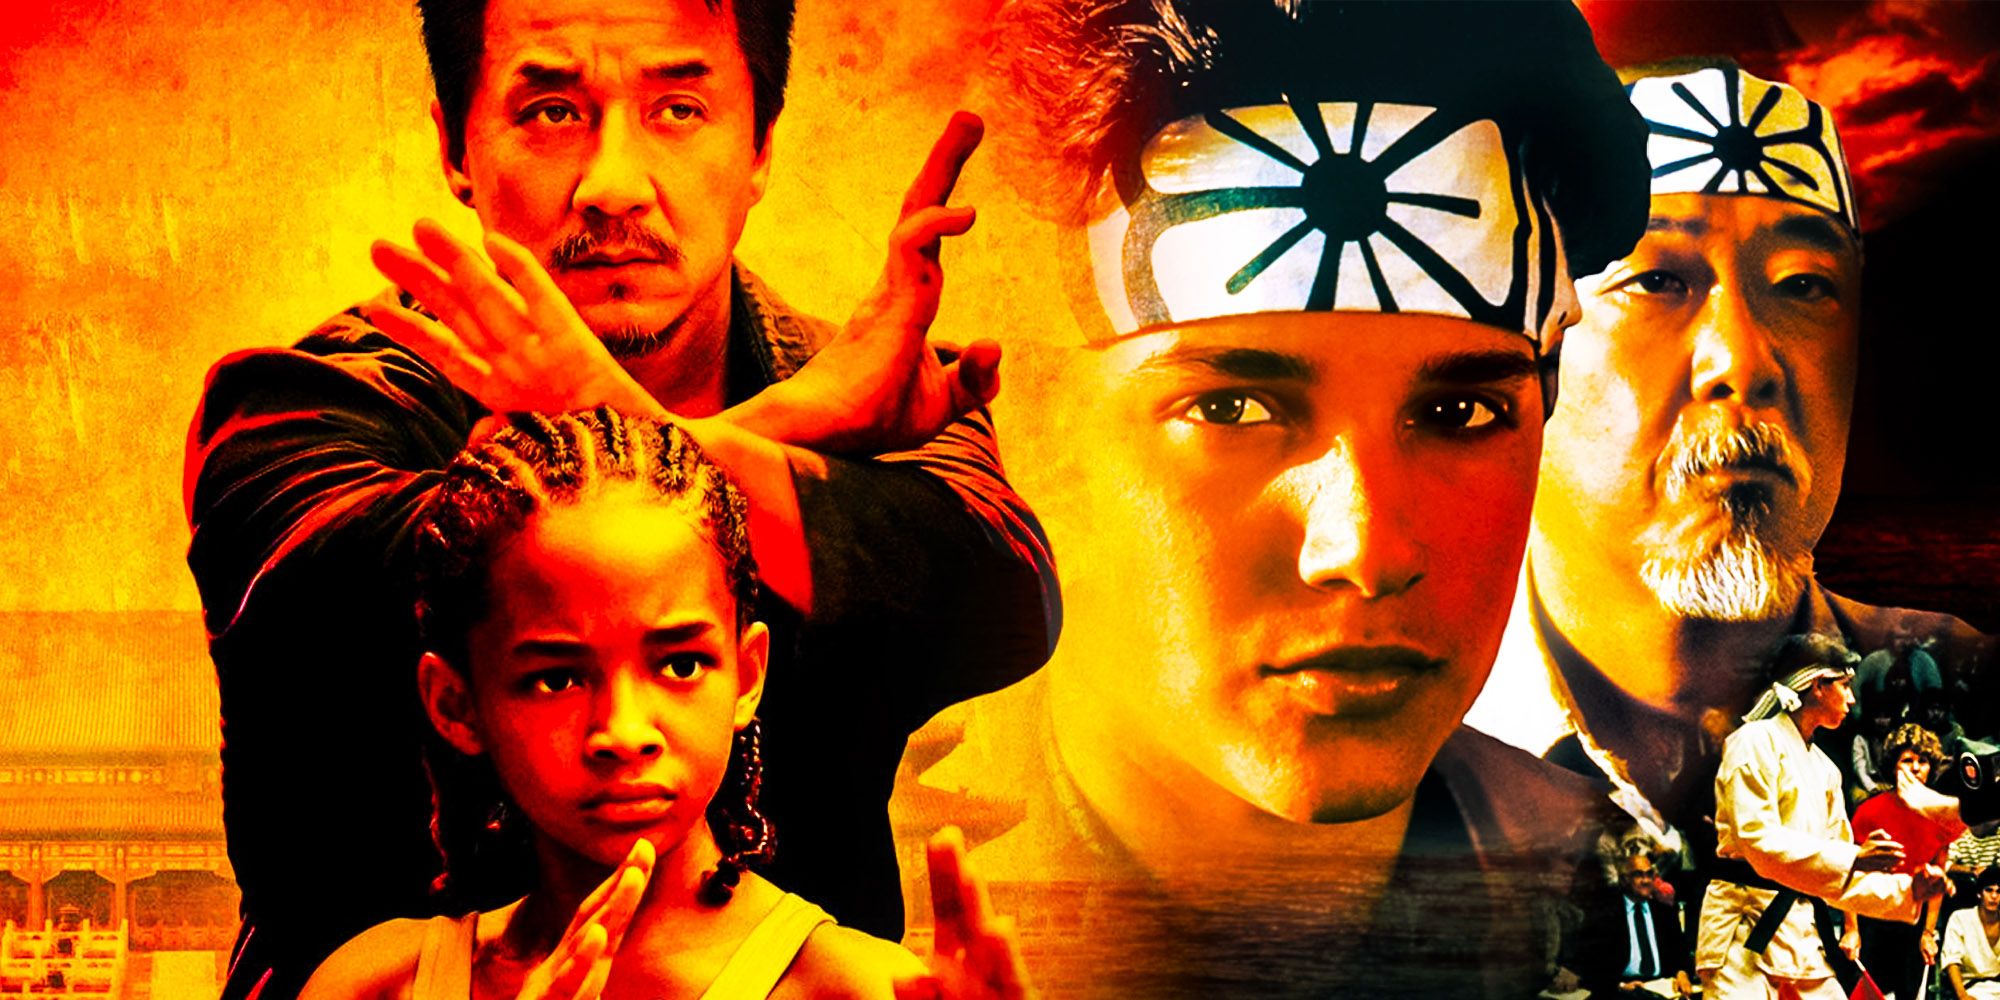 A composite image of the cast of Karate Kid and Cobra Kai